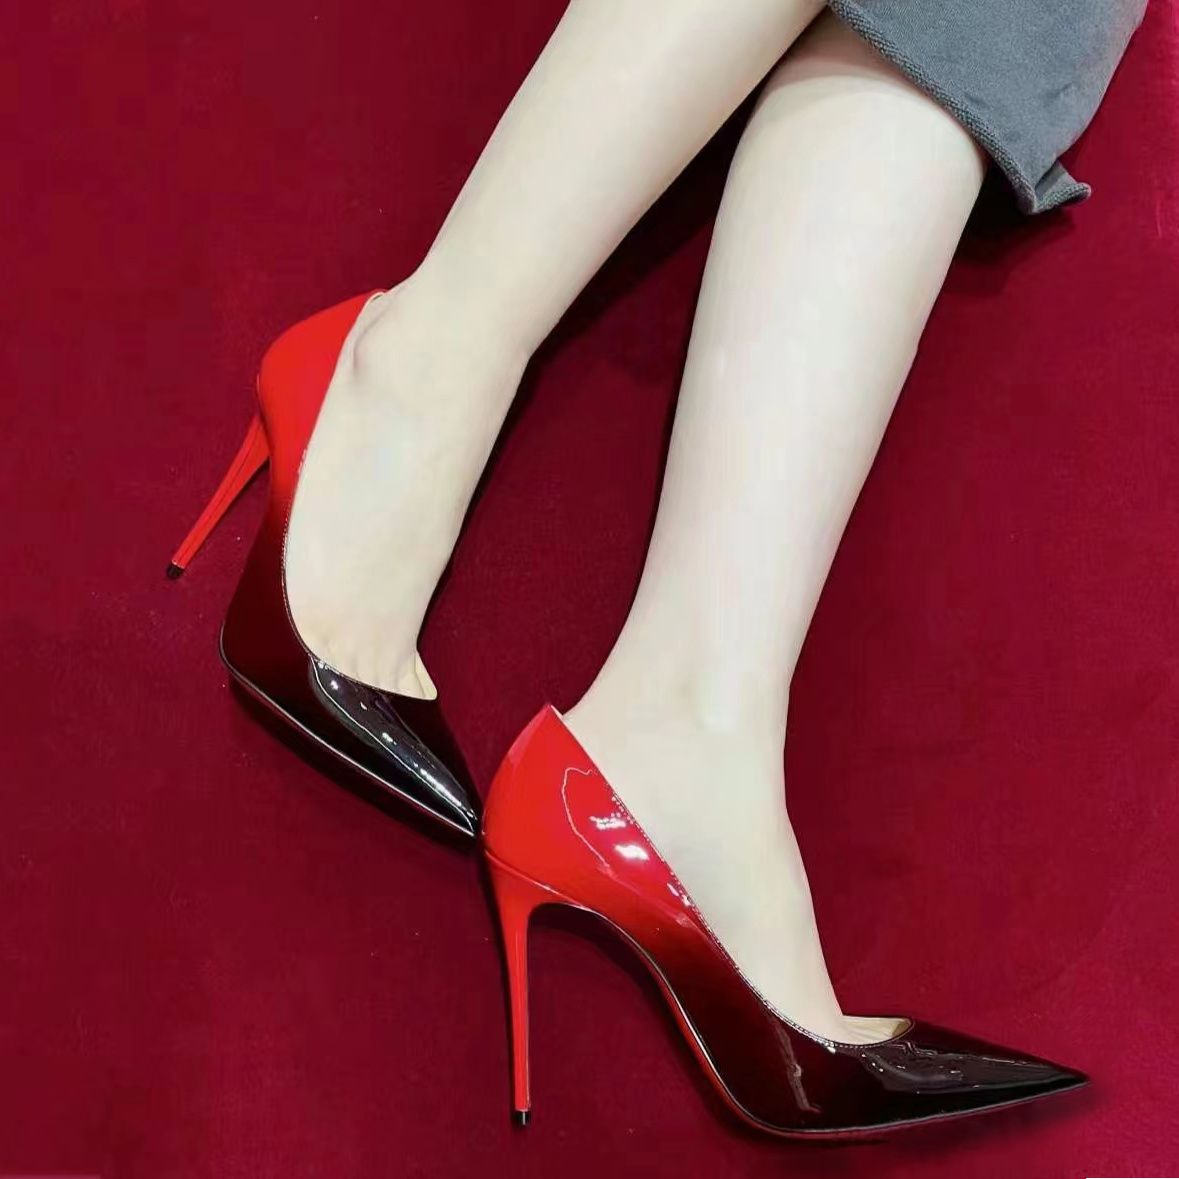 New [Black and Red Gradient Color] Patent Leather High Heels Women's Stiletto Heel Pointed Toe Shallow Mouth Sexy Red Soled Shoes